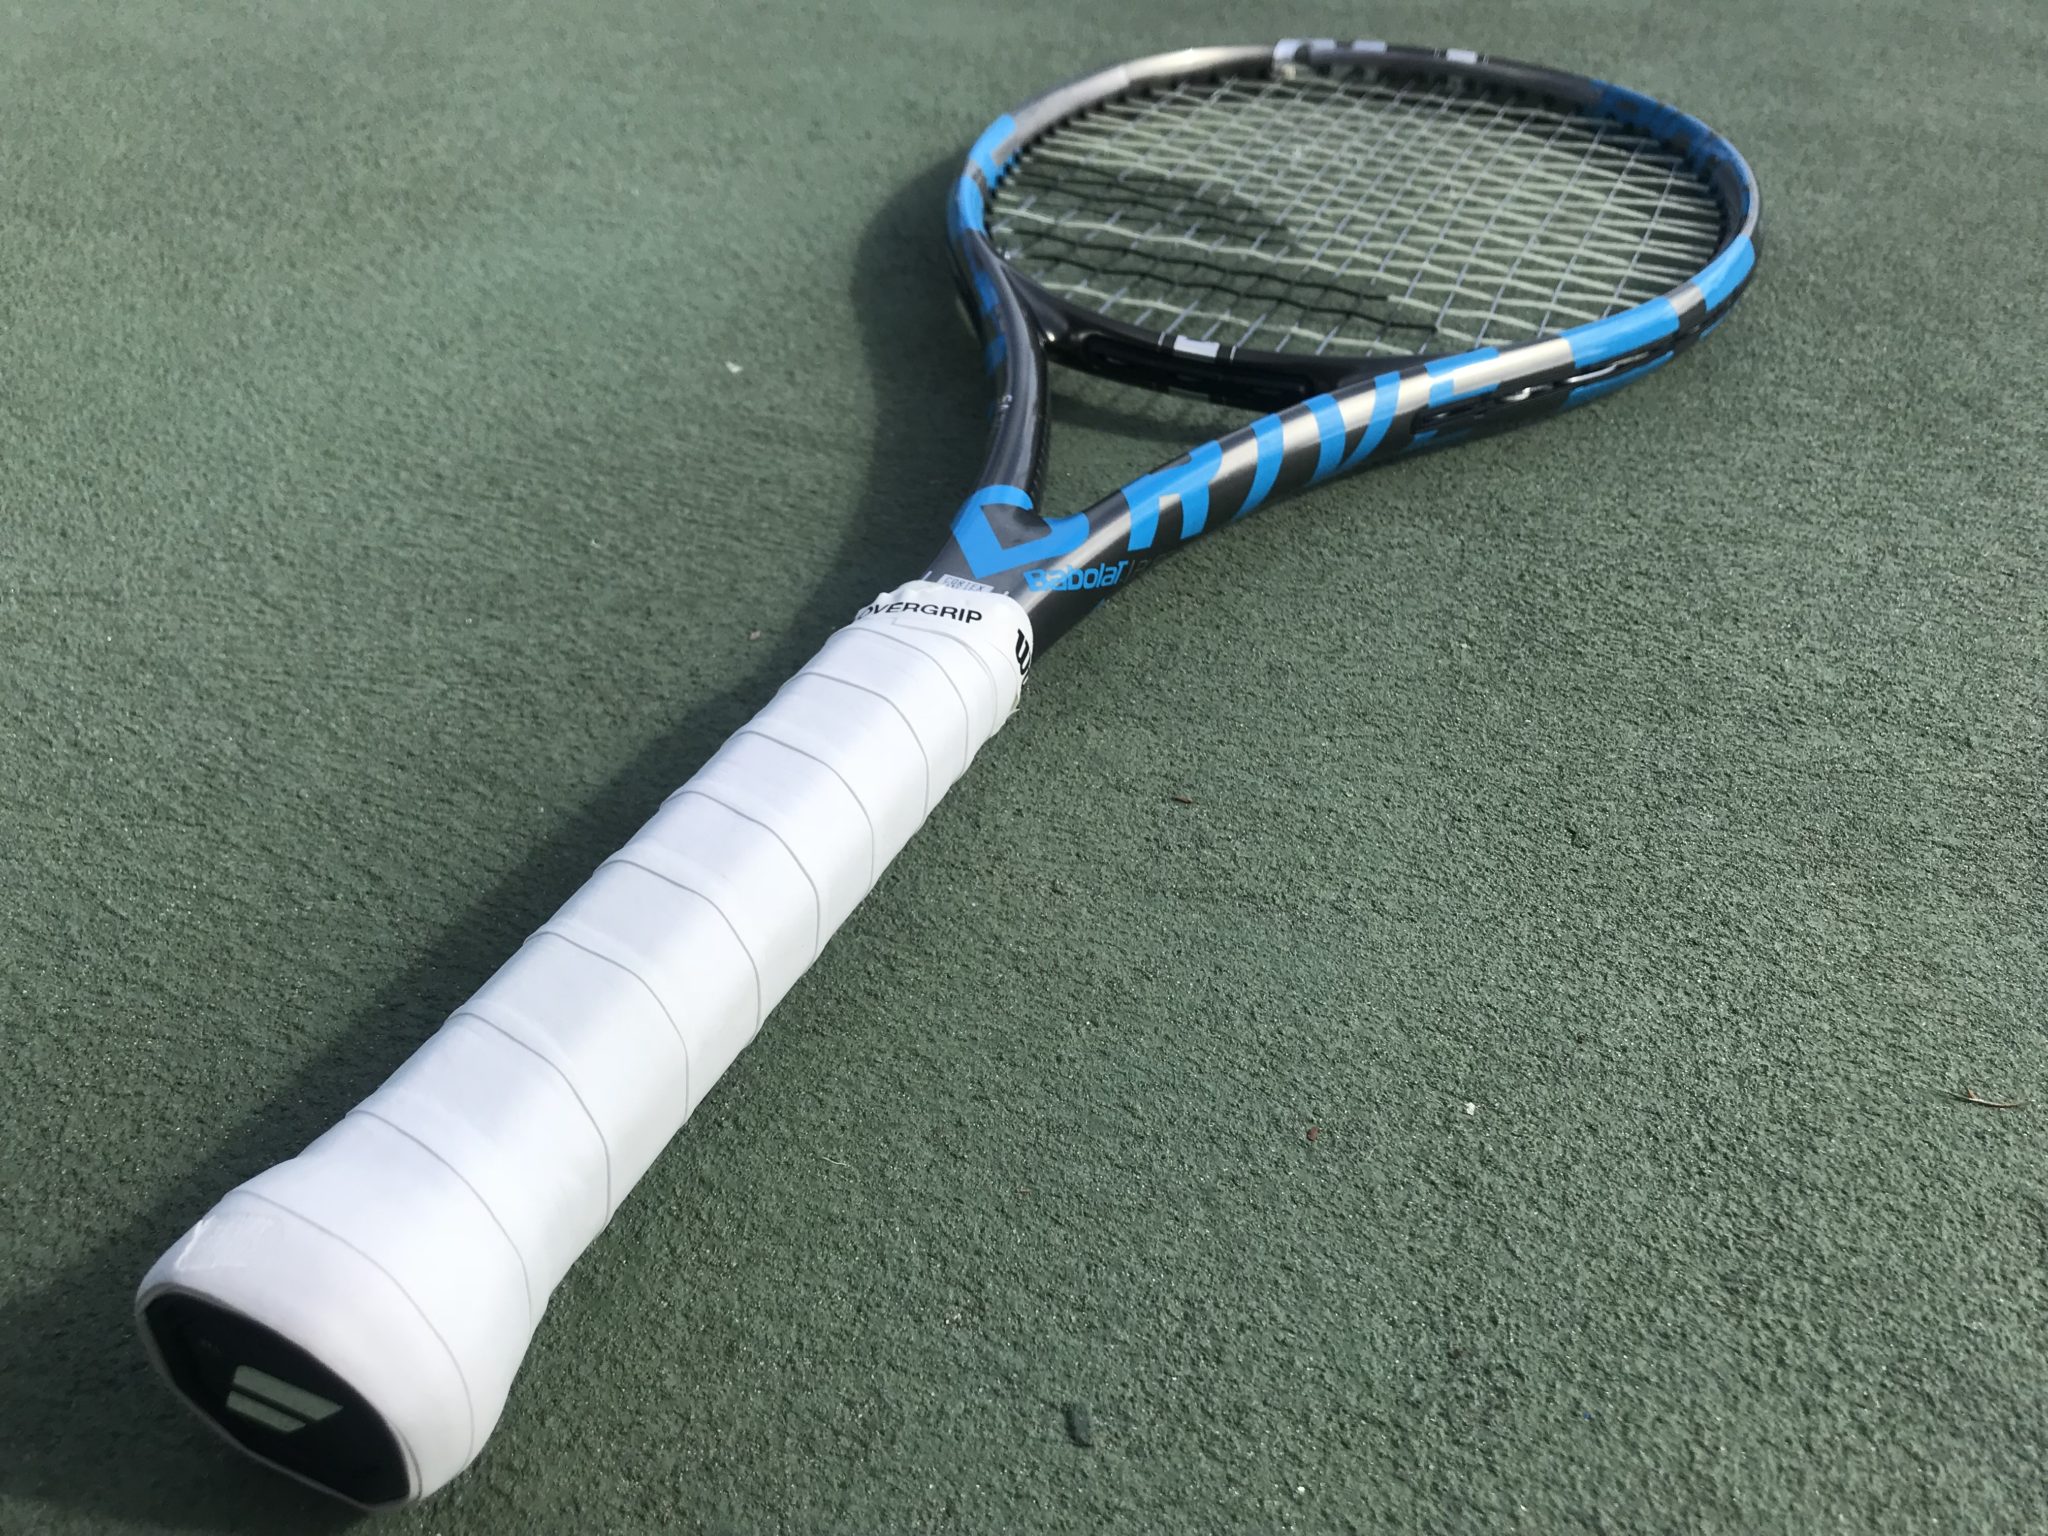 Babolat Pure Drive VS Racquet Review - What does the new VS play like?